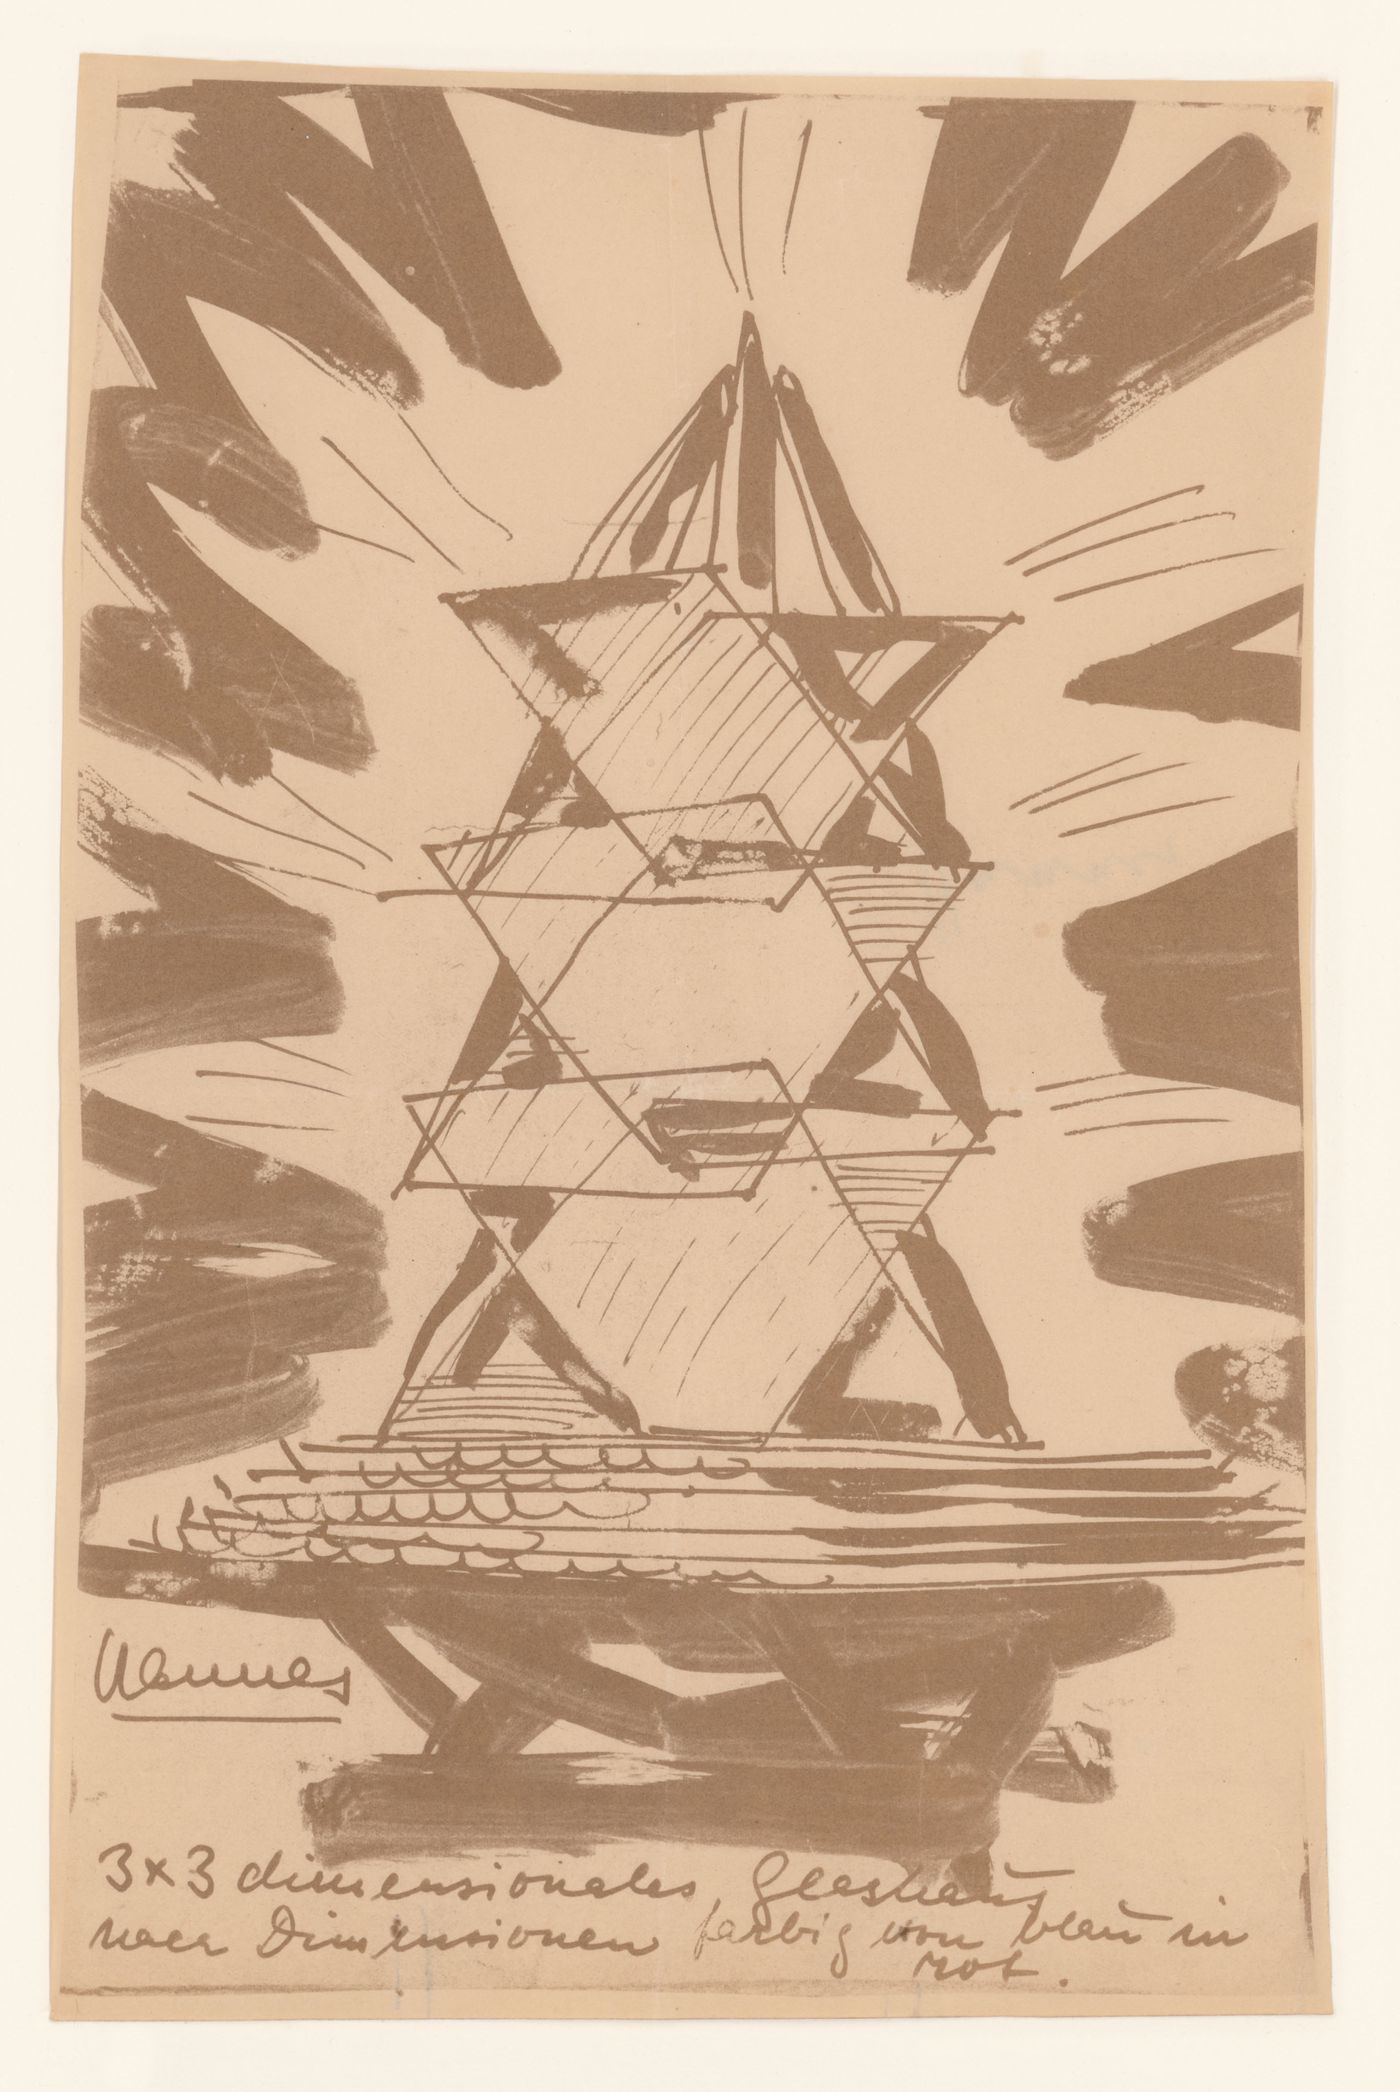 Drawing of a glass house project by Hans Scharoun